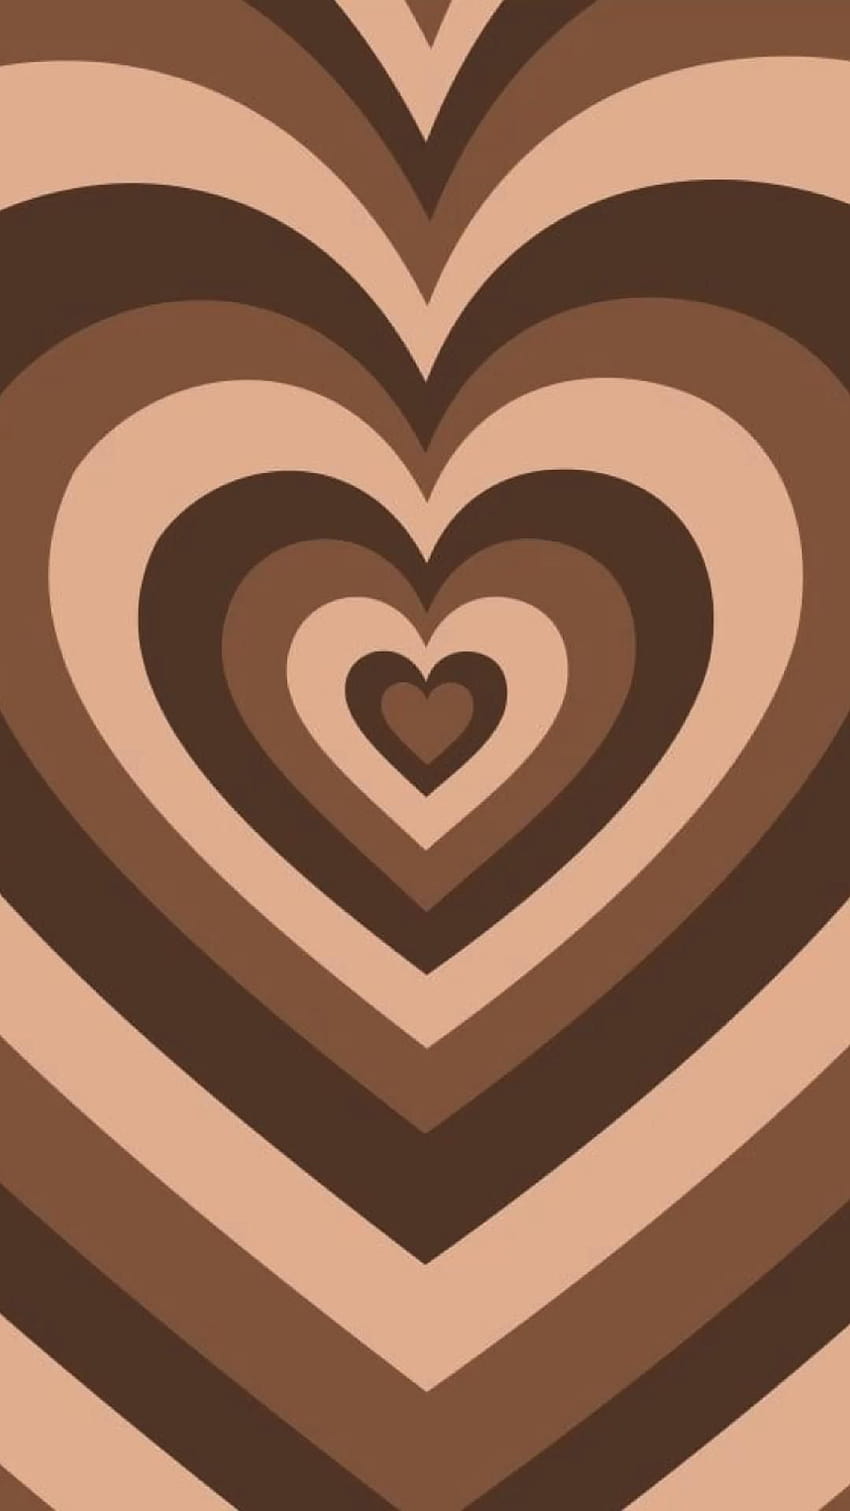 Brown heart wallpaper for your phone - Heart, brown